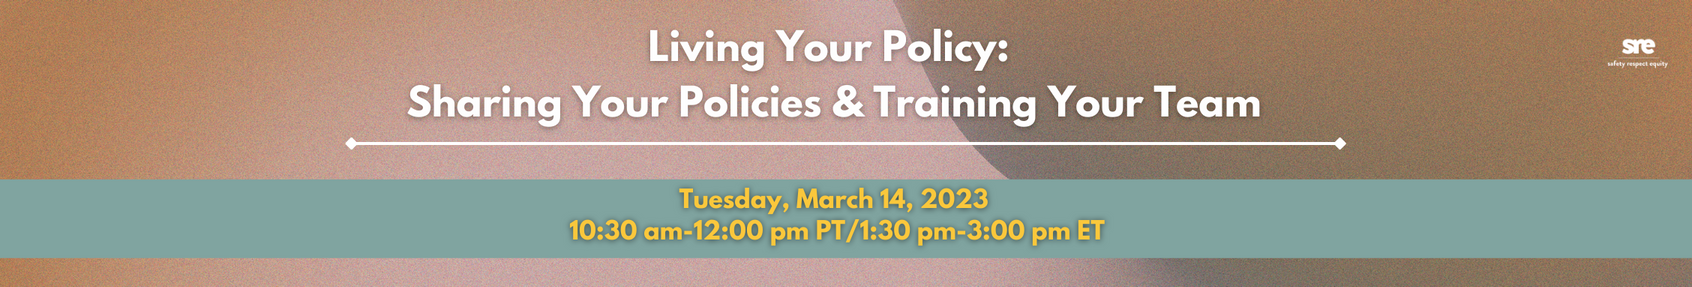 Programming Graphics Living your policy (LinkedIn Banner) (1)